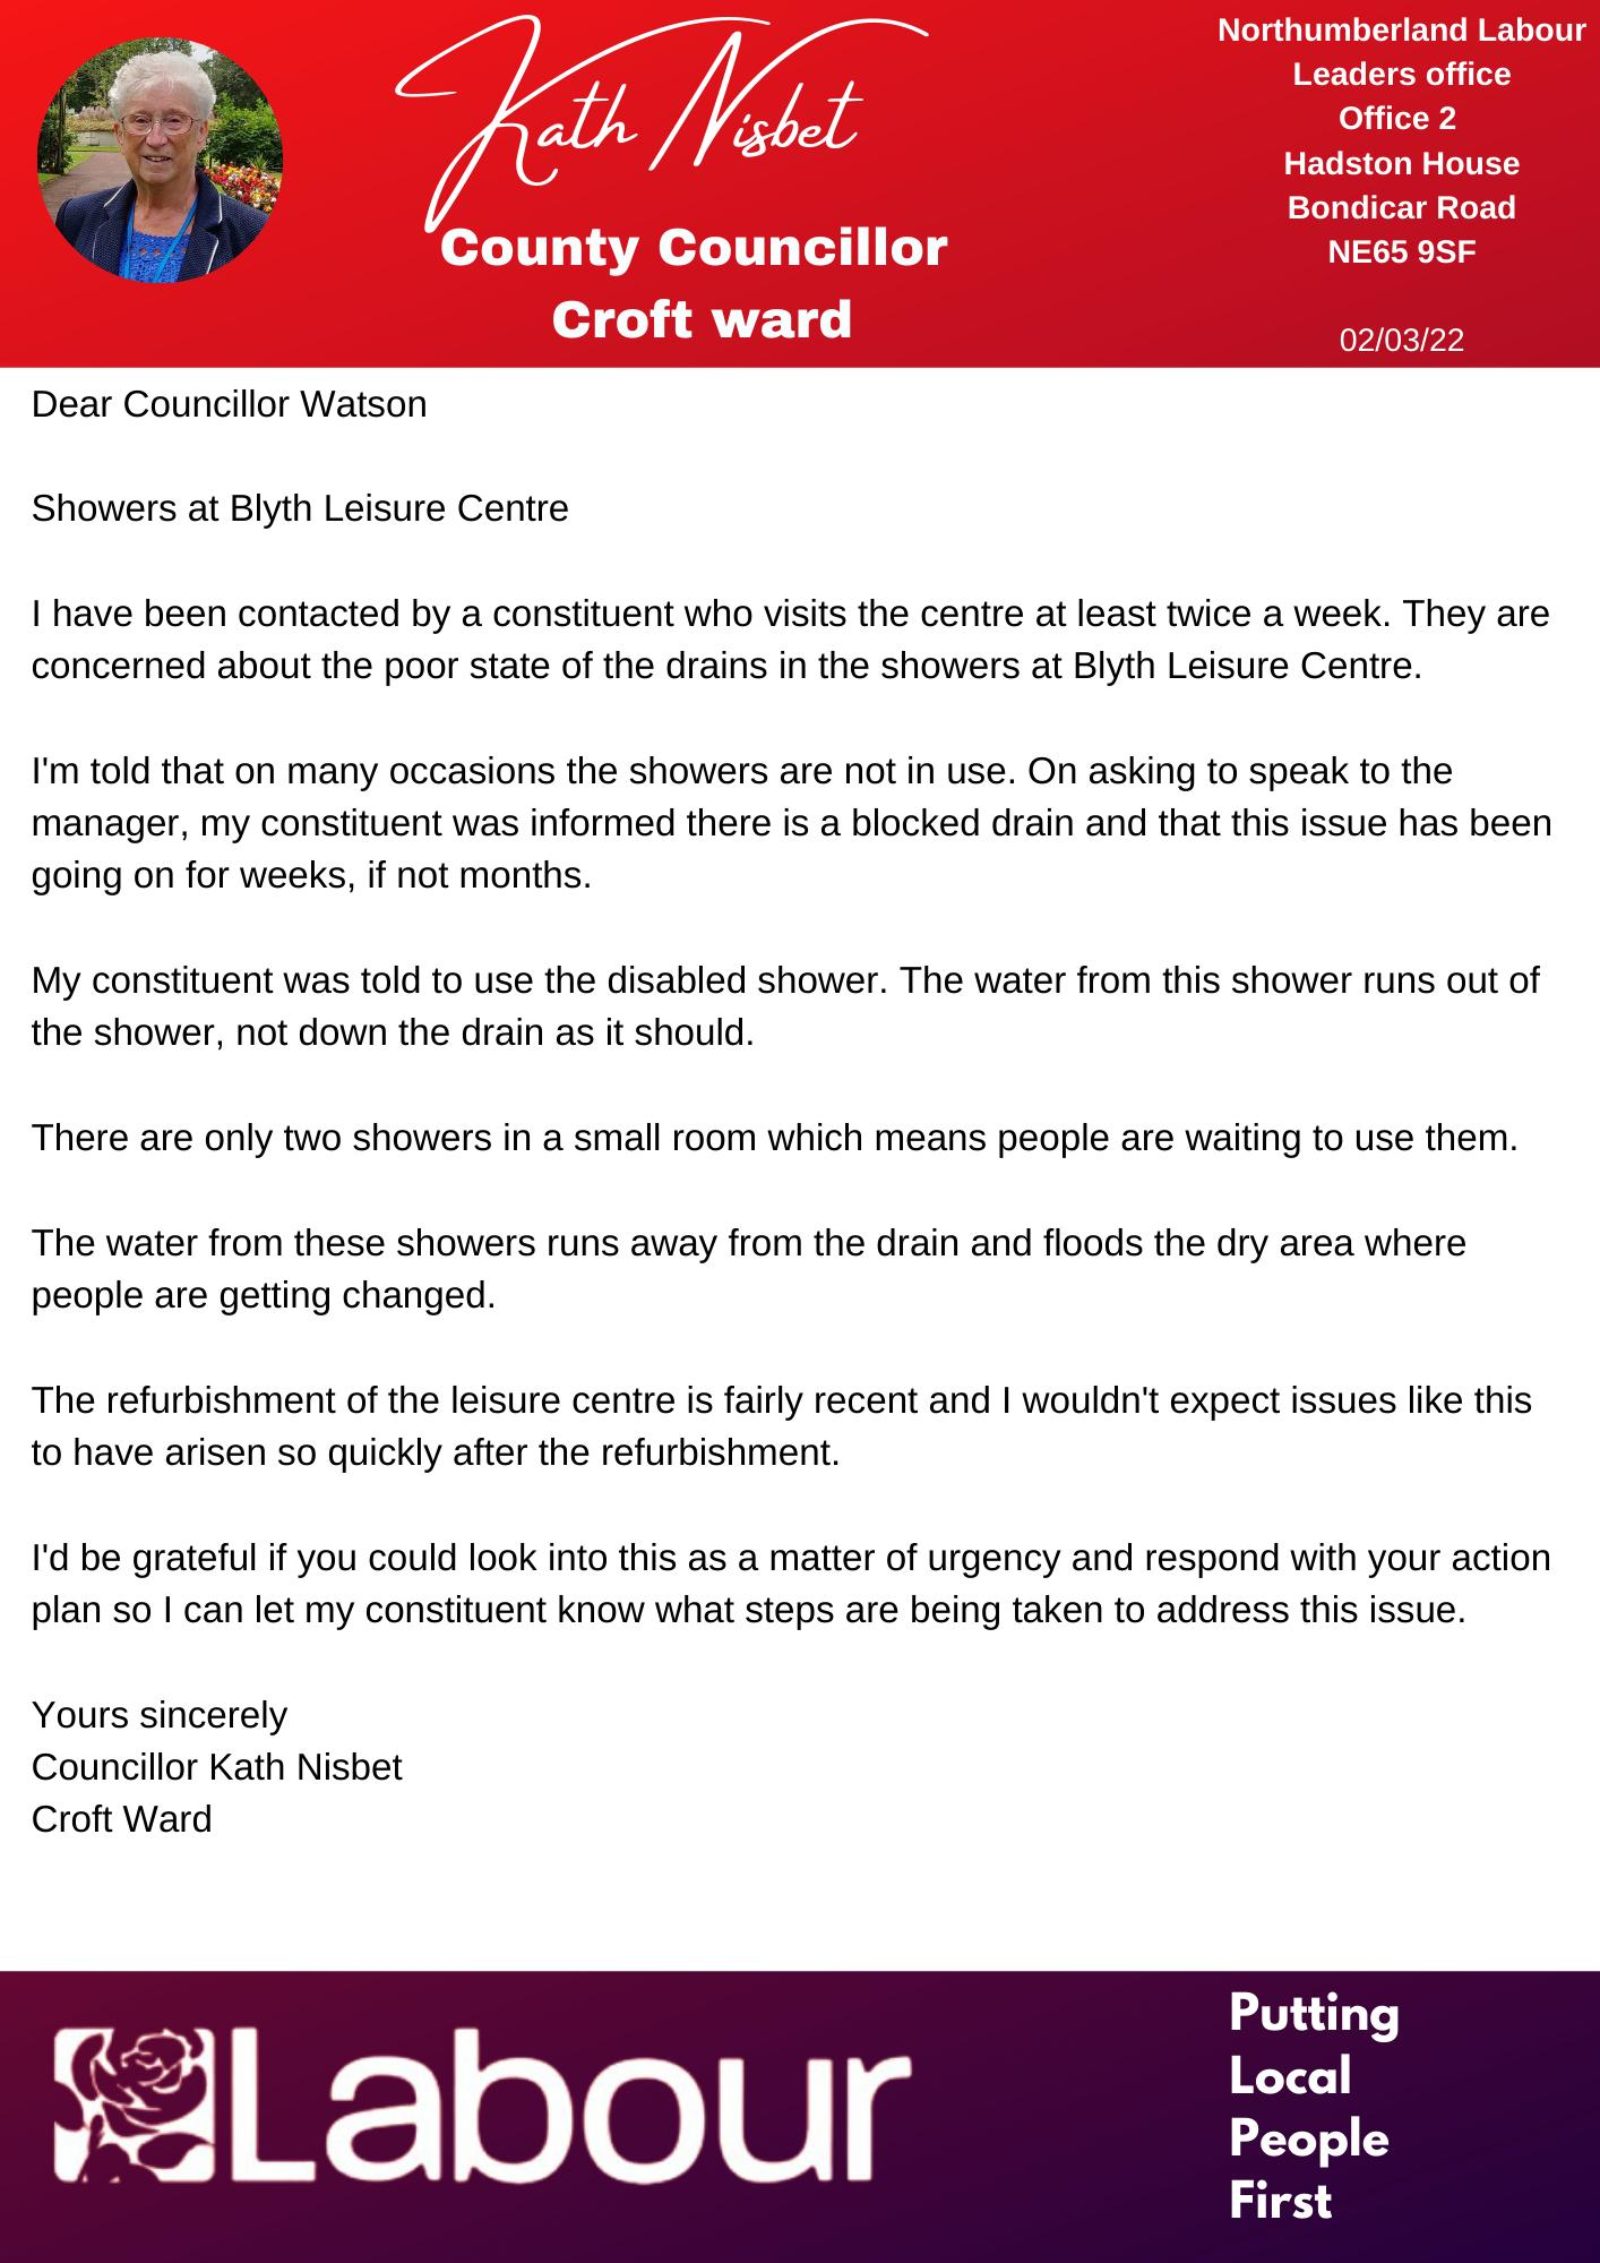 Letter From Councillor Kath Nisbet to Councillor Watson